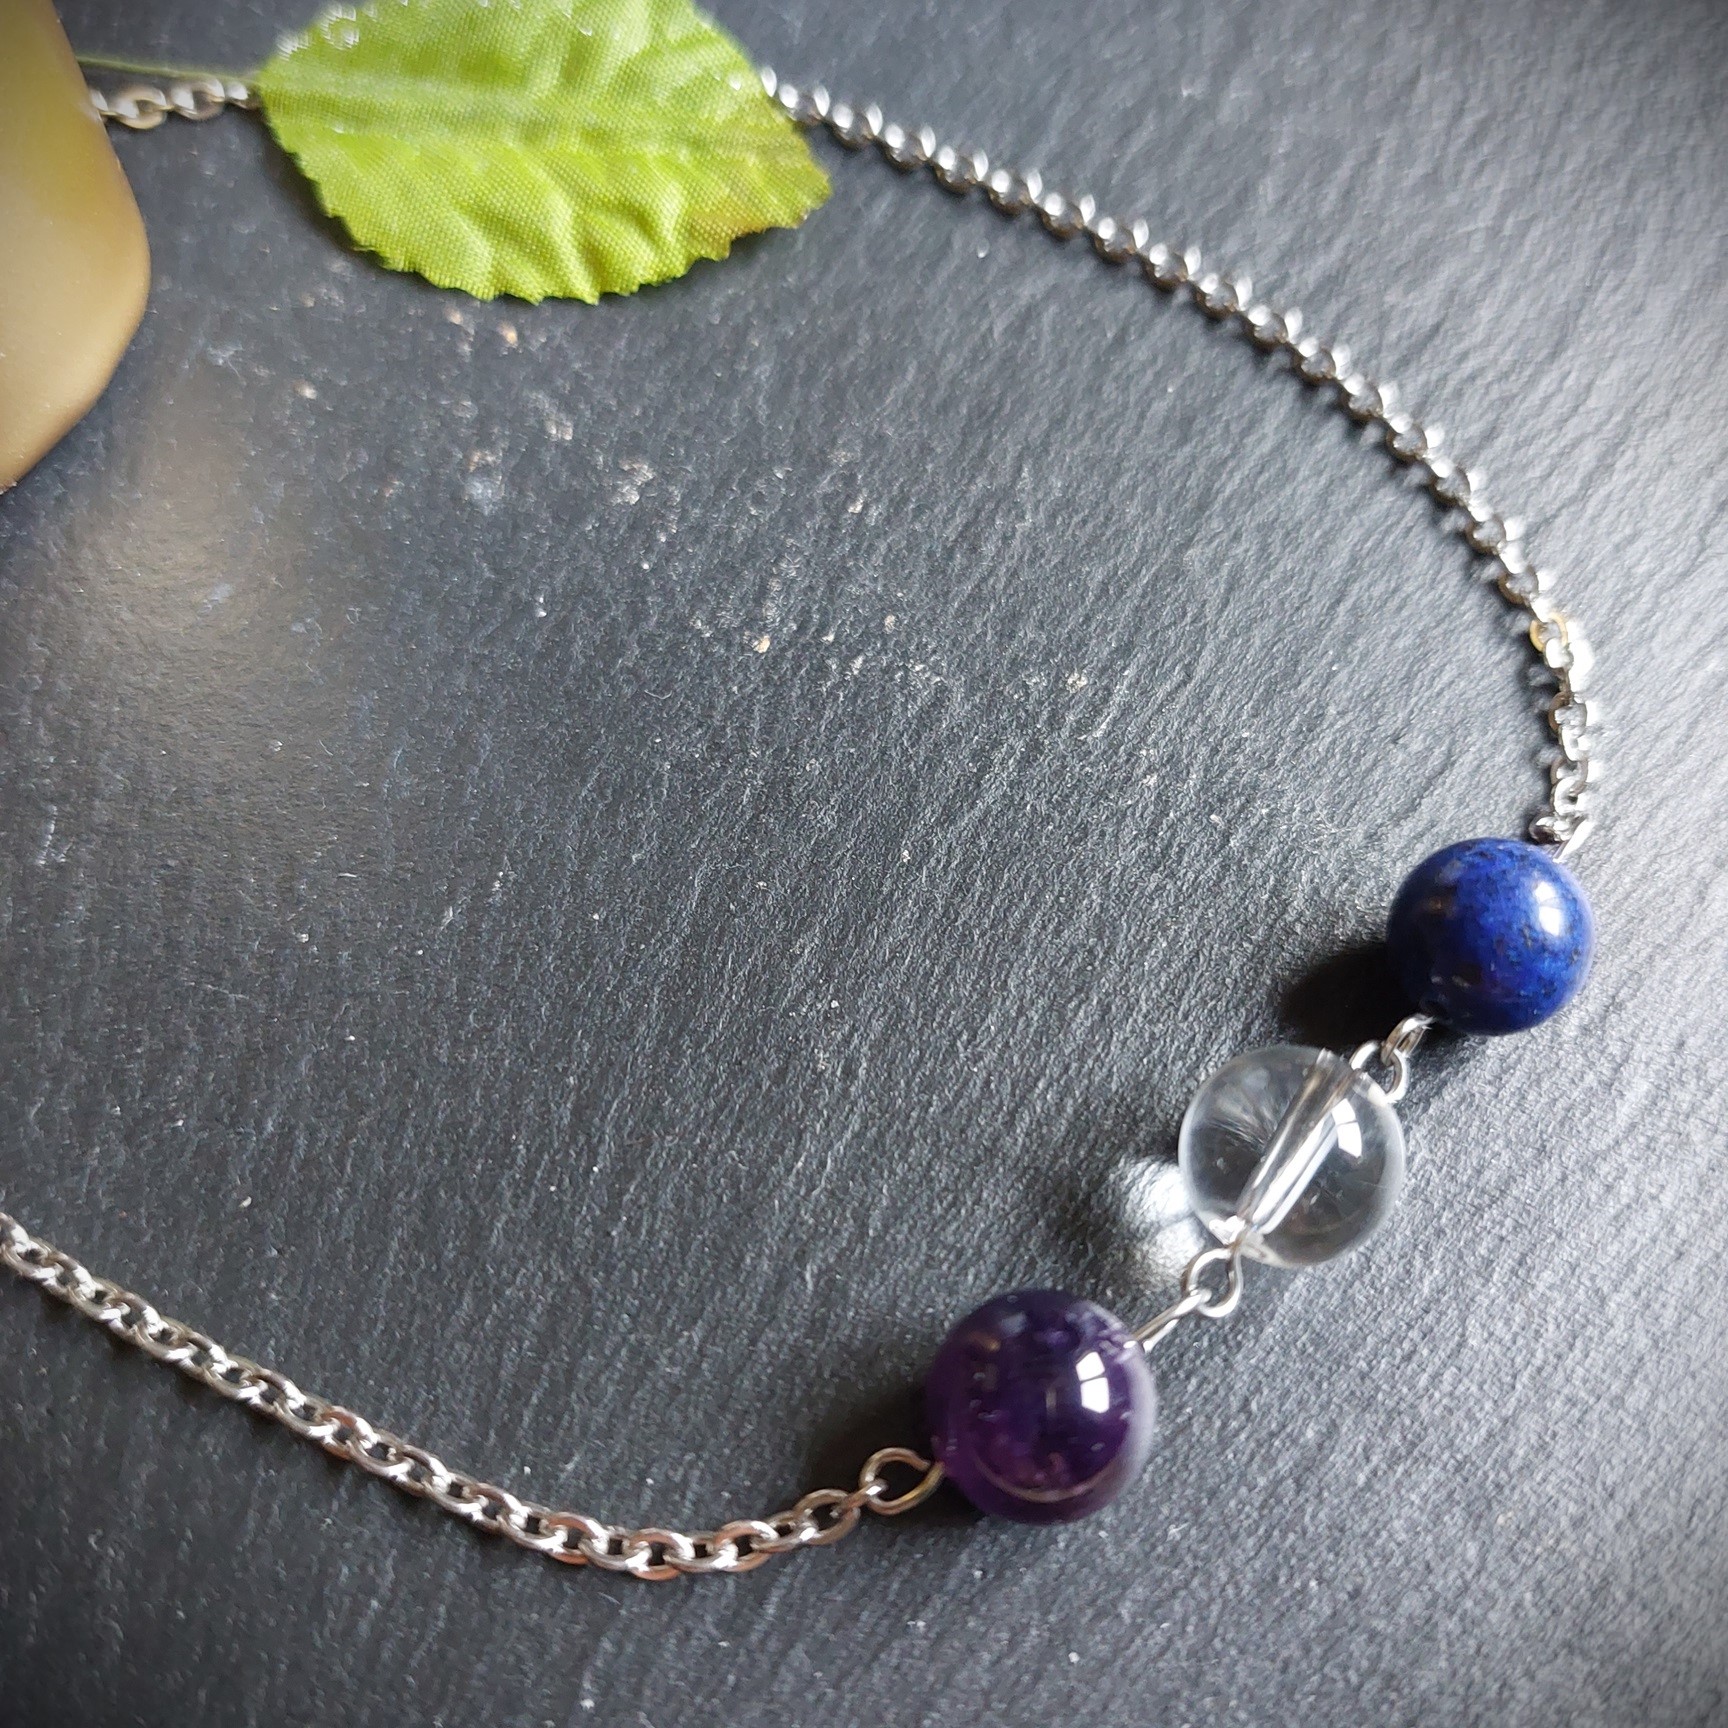 Choker necklace with 3 amethyst beads, rock crystal and lapis lazuli